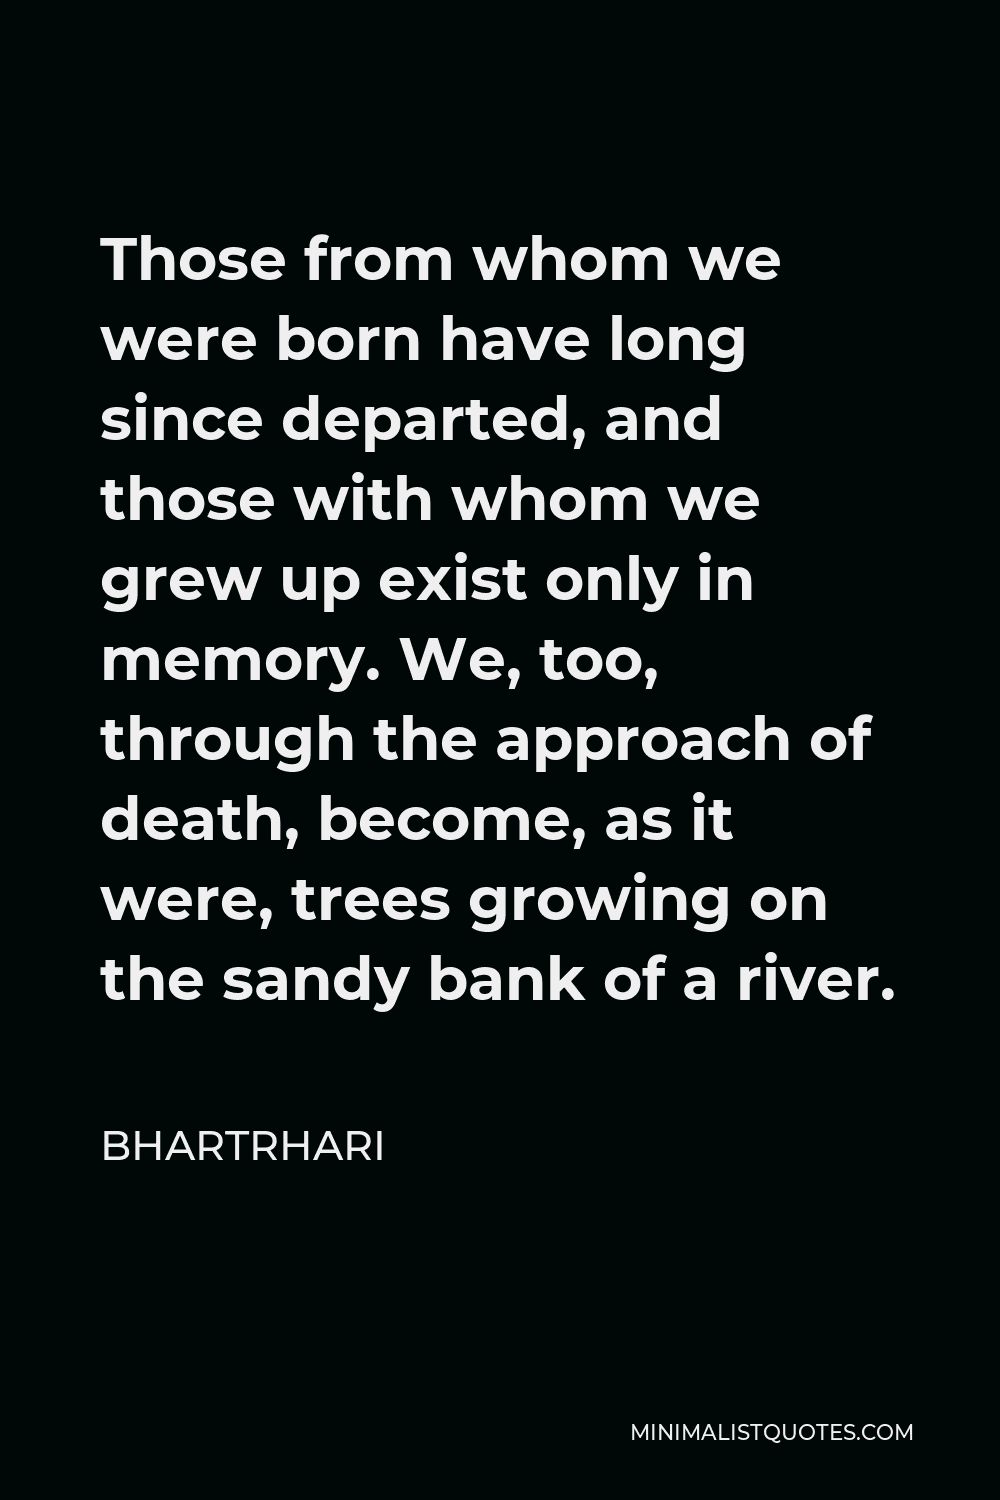 Bhartrhari Quote - Those from whom we were born have long since departed, and those with whom we grew up exist only in memory. We, too, through the approach of death, become, as it were, trees growing on the sandy bank of a river.